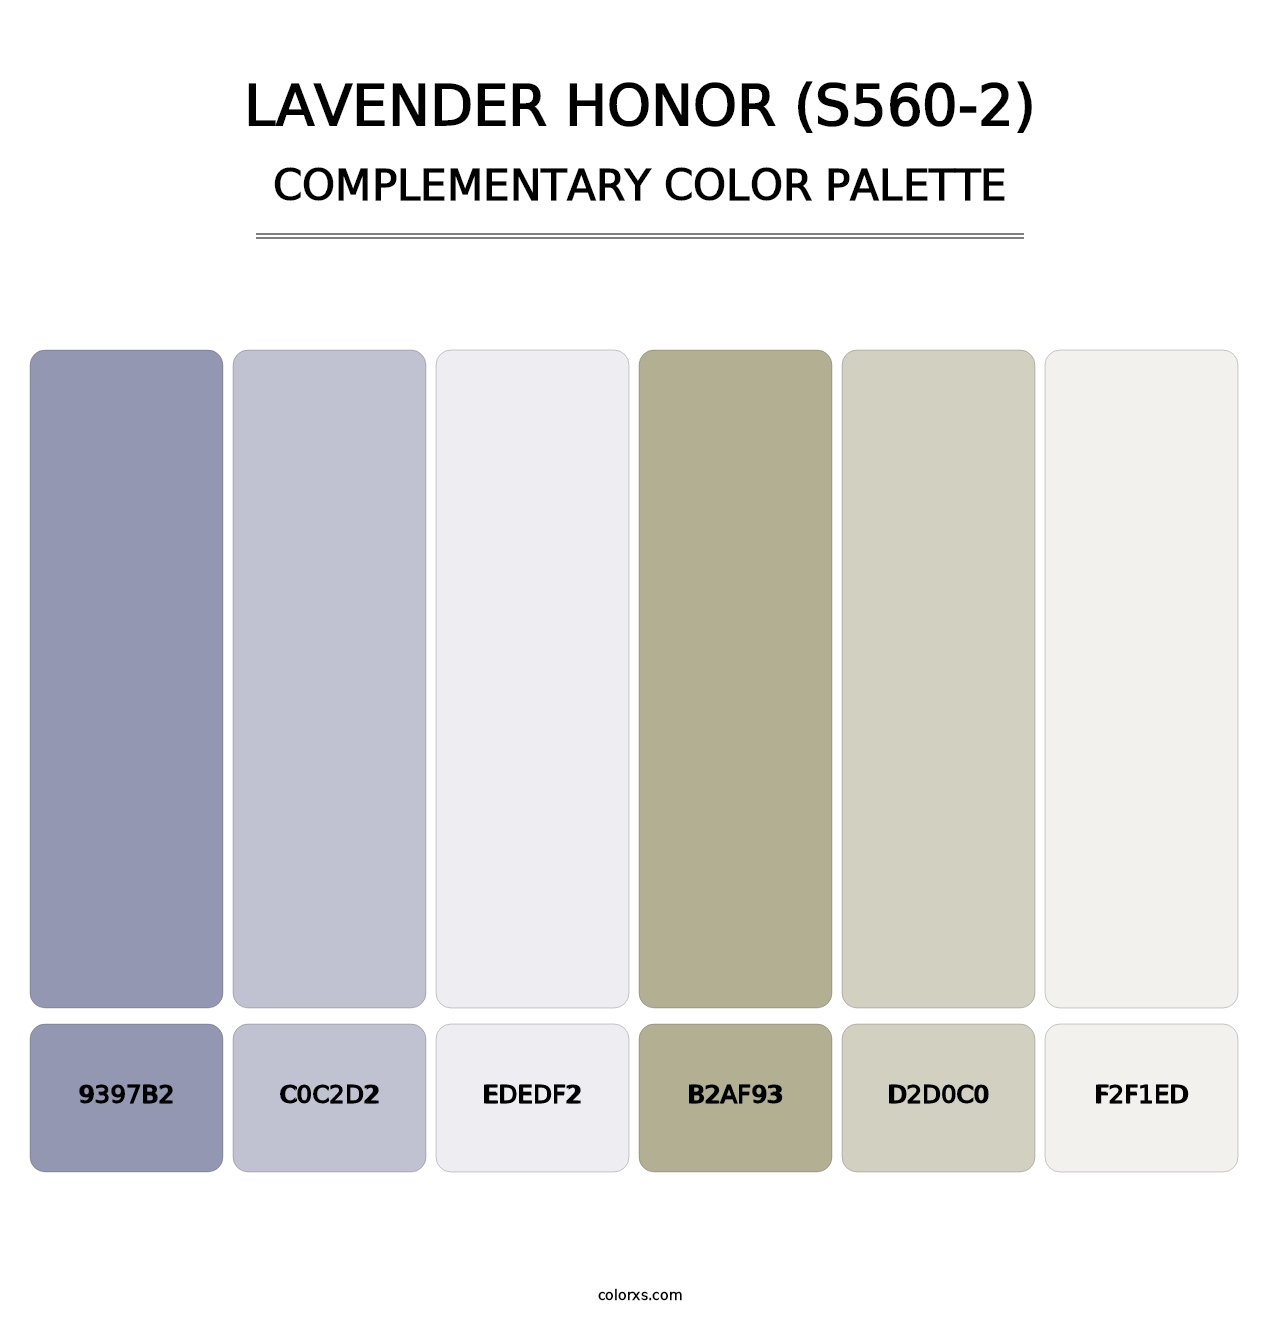 Lavender Honor (S560-2) - Complementary Color Palette